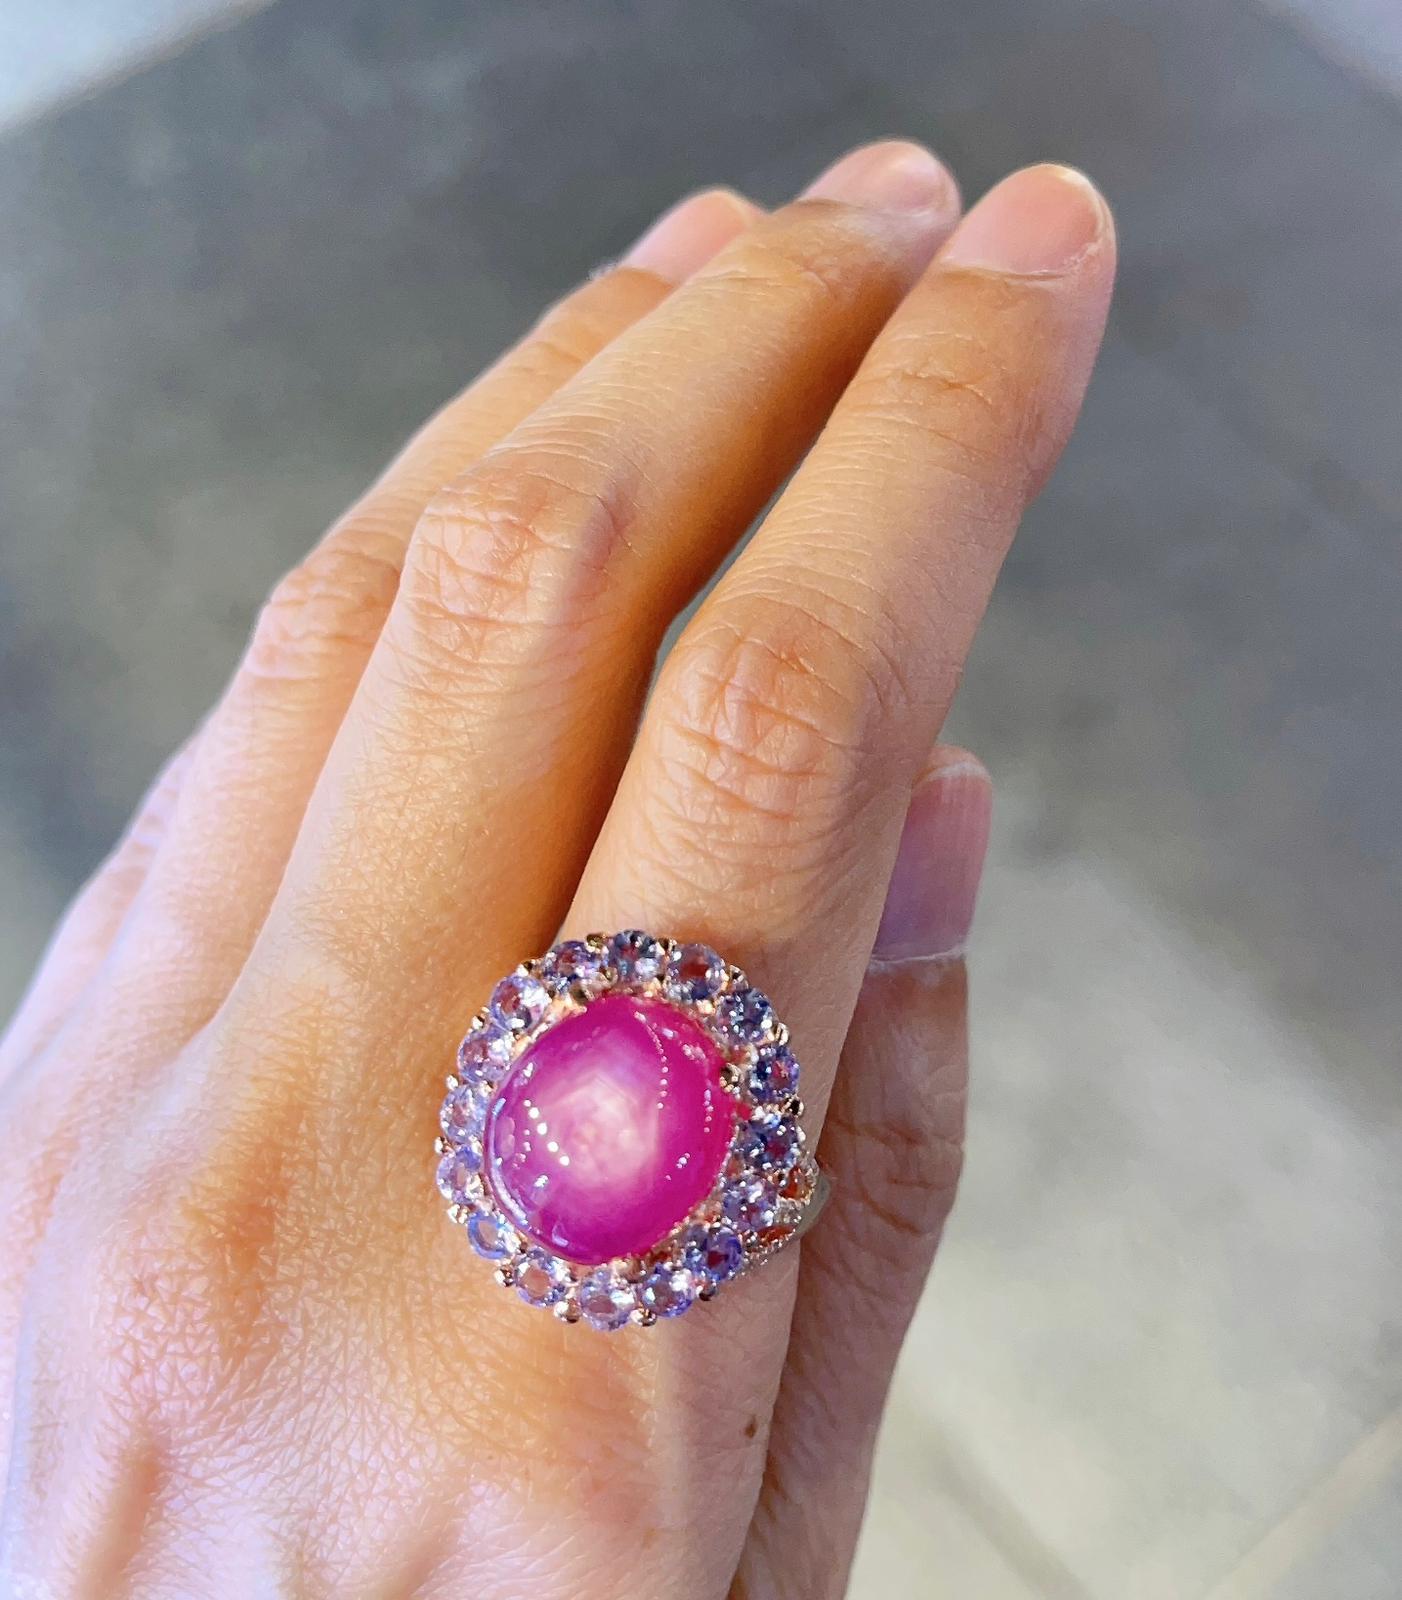 Cabochon Bochic “Capri” Star Ruby Cocktail Ring with Purple Tanzanite set in 22K Gold … For Sale